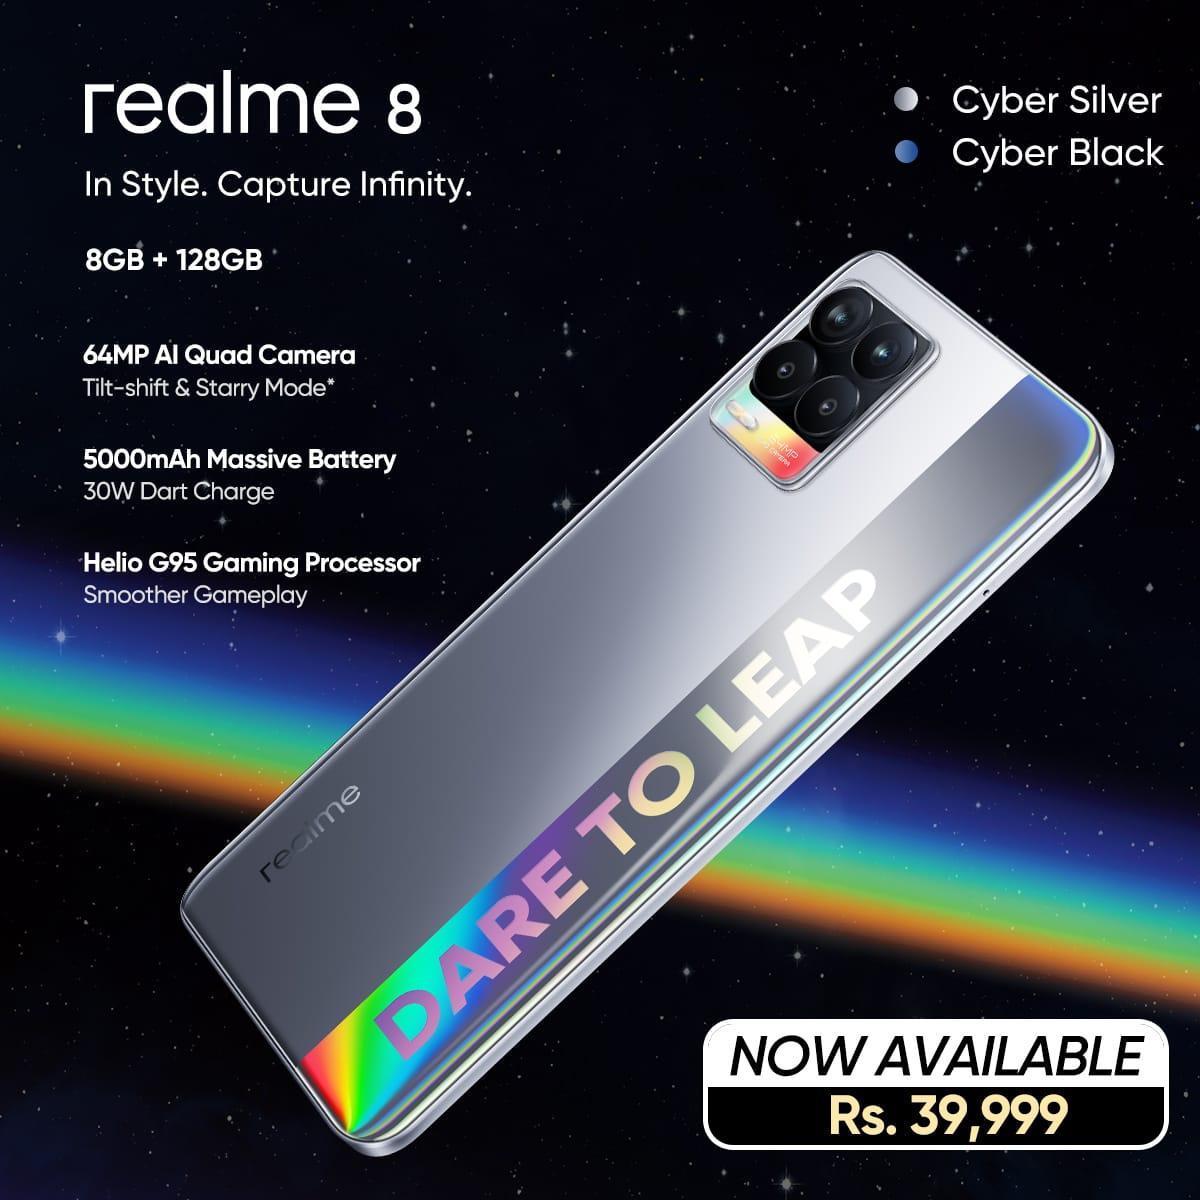 The Gaming Beast realme 8 is Now Available Across Pakistan